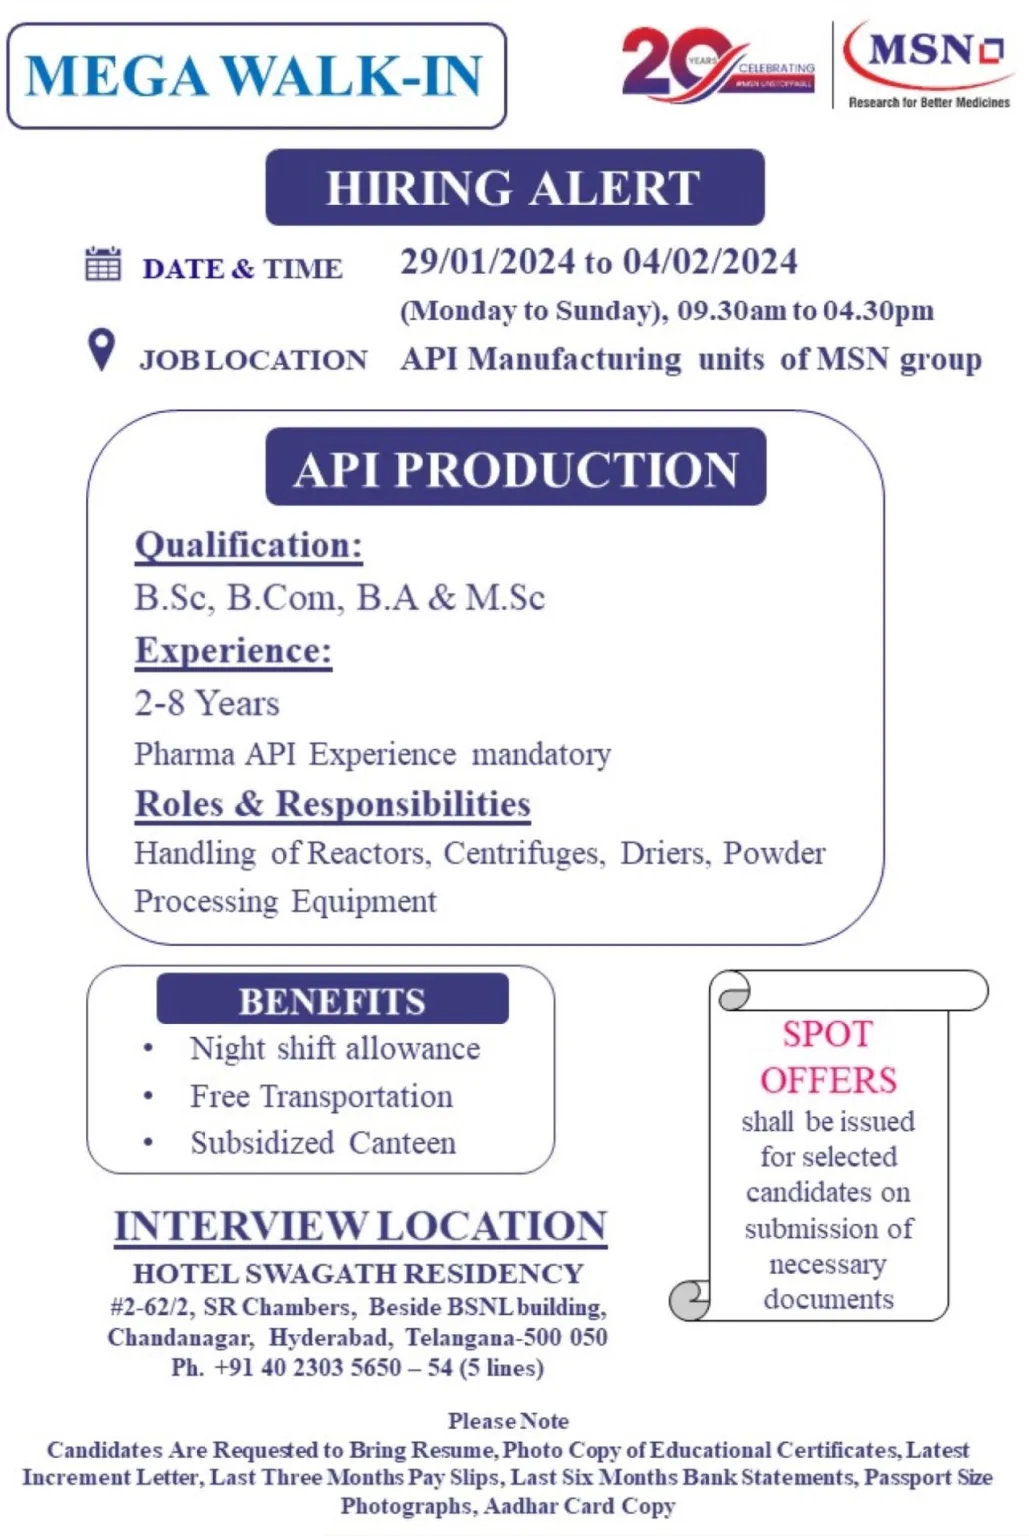 MSN LABS - Mega Walk-In Interviews for API Production, Peptide R&D, Process R&D, TSD, Engineering Services on 29th Jan - 4th Feb 2024